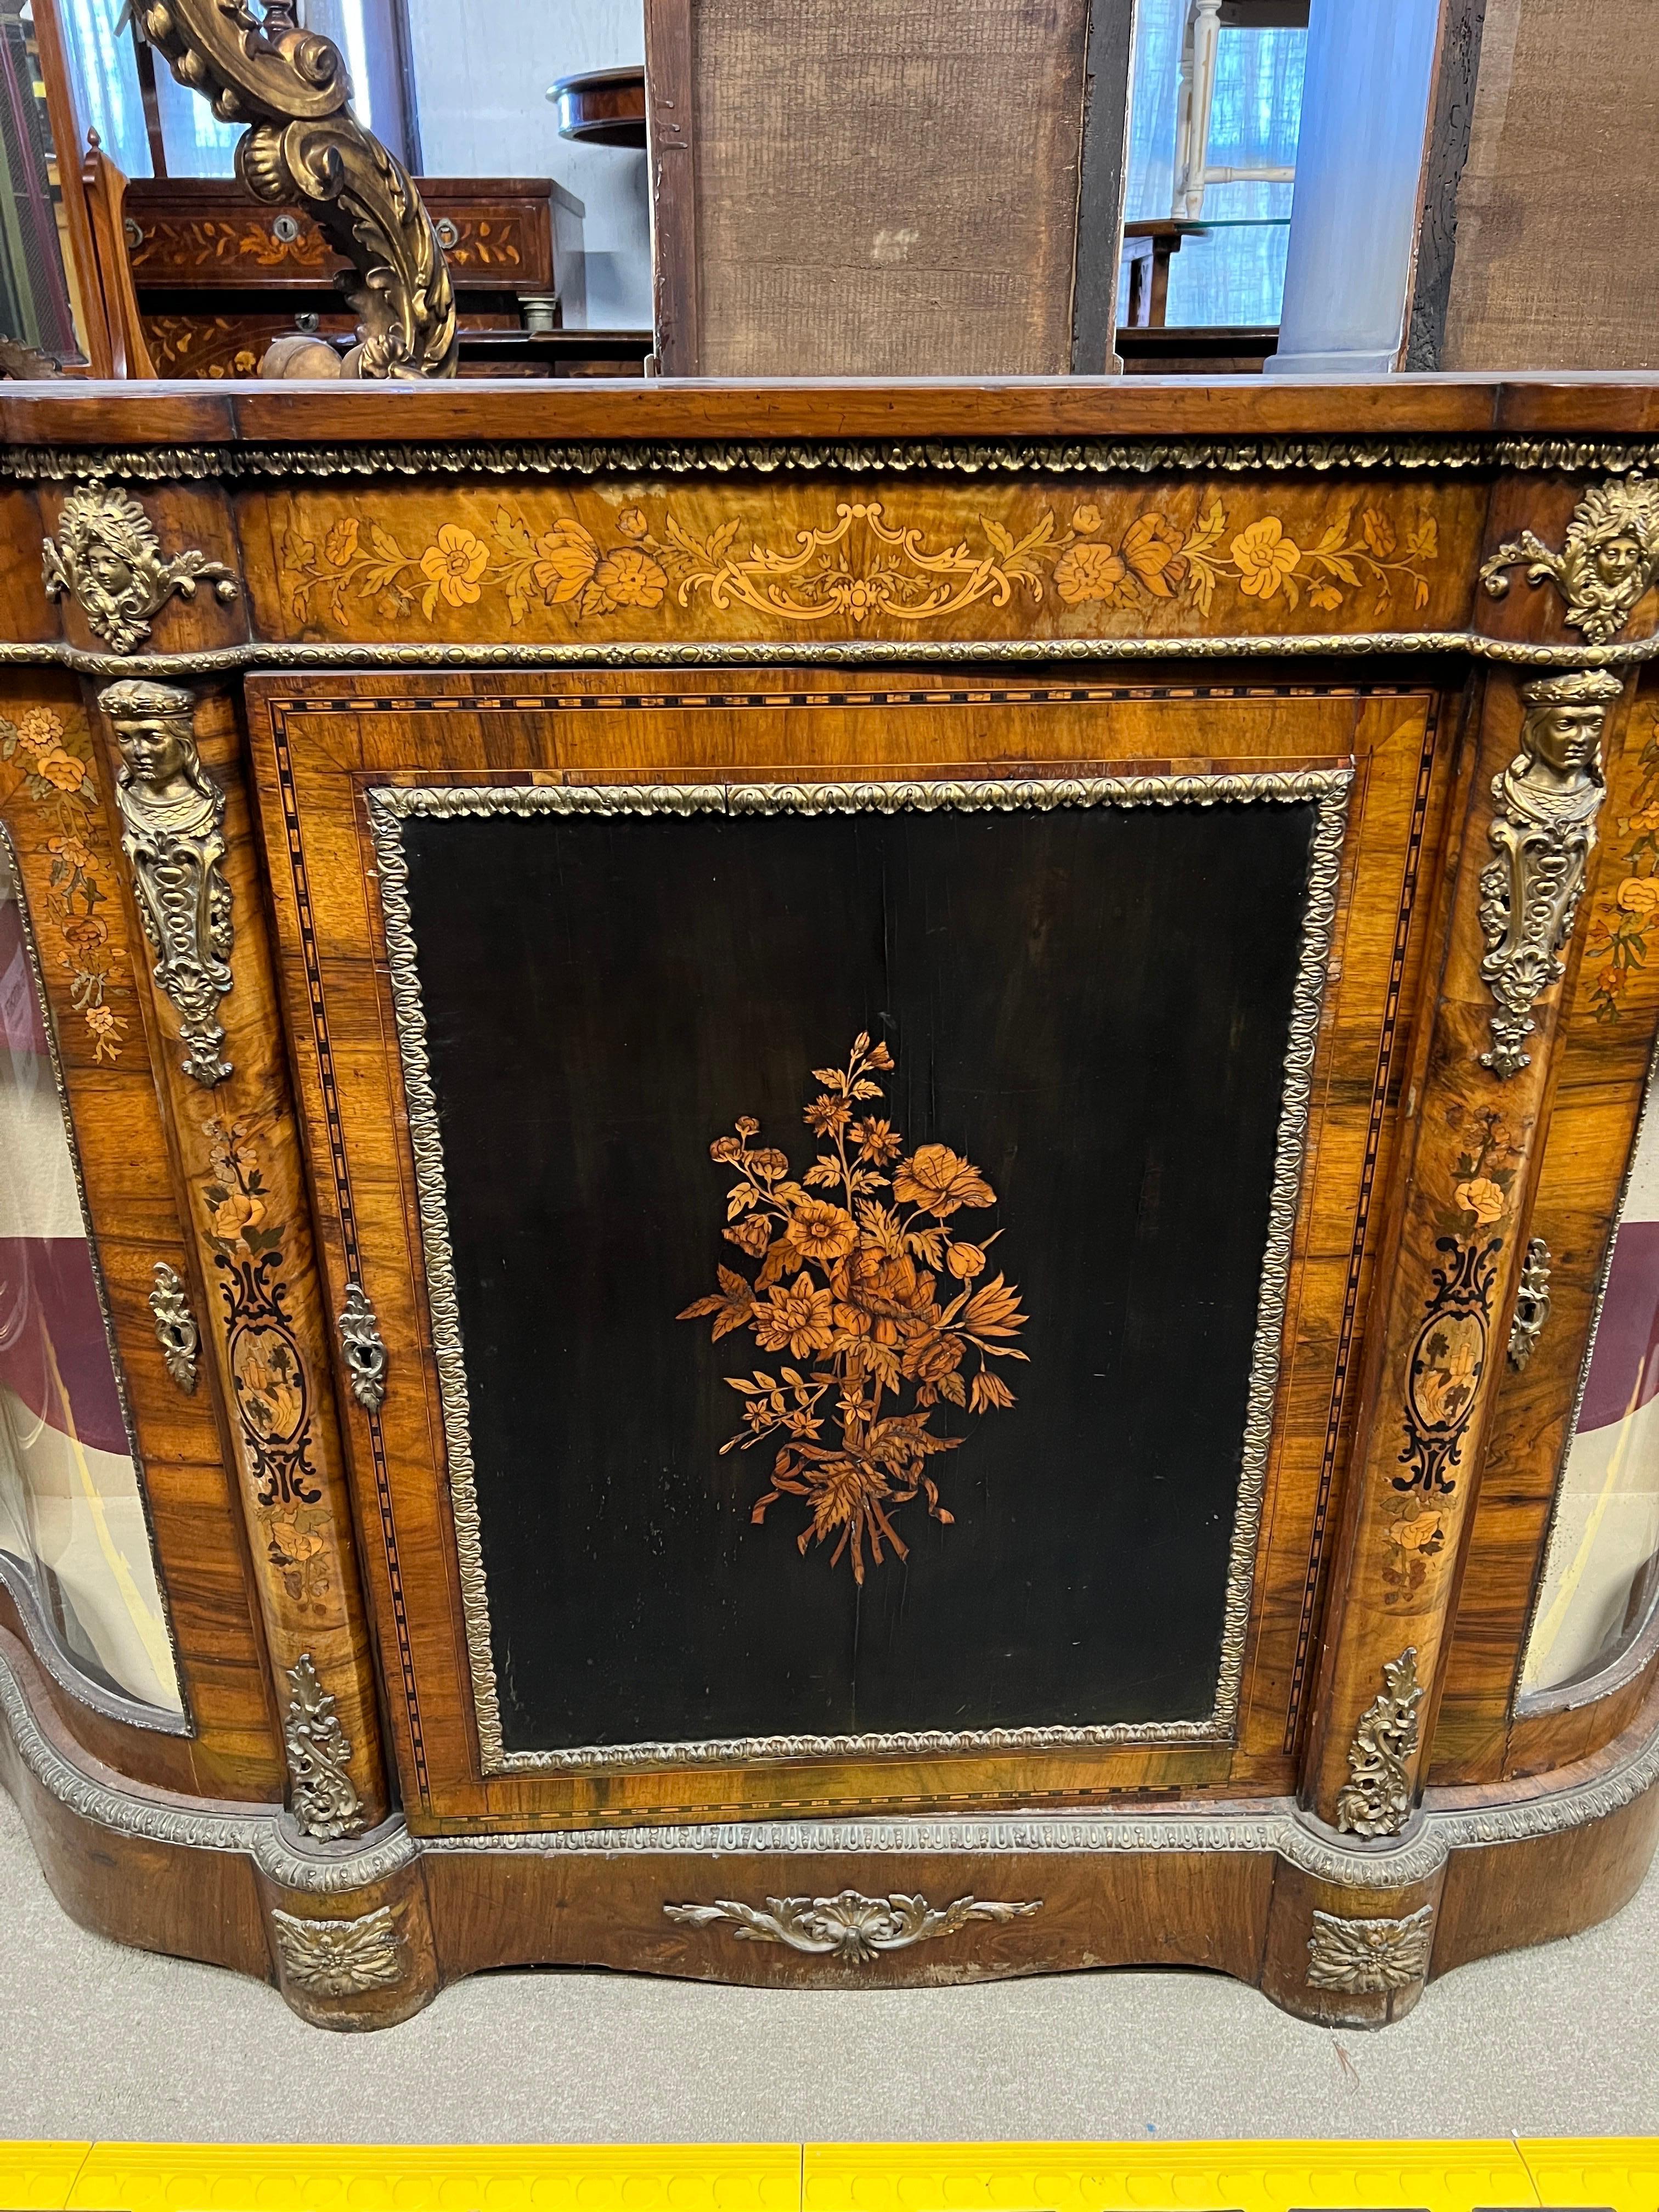 Fantastic serpentine Moved Sideboards, made of walnut burl, with fruitwood inlays , bronze applications depicting faces of women and men, floral pattern inlays and on the uprights landscape with castle.
Furniture that looks like small works of art,